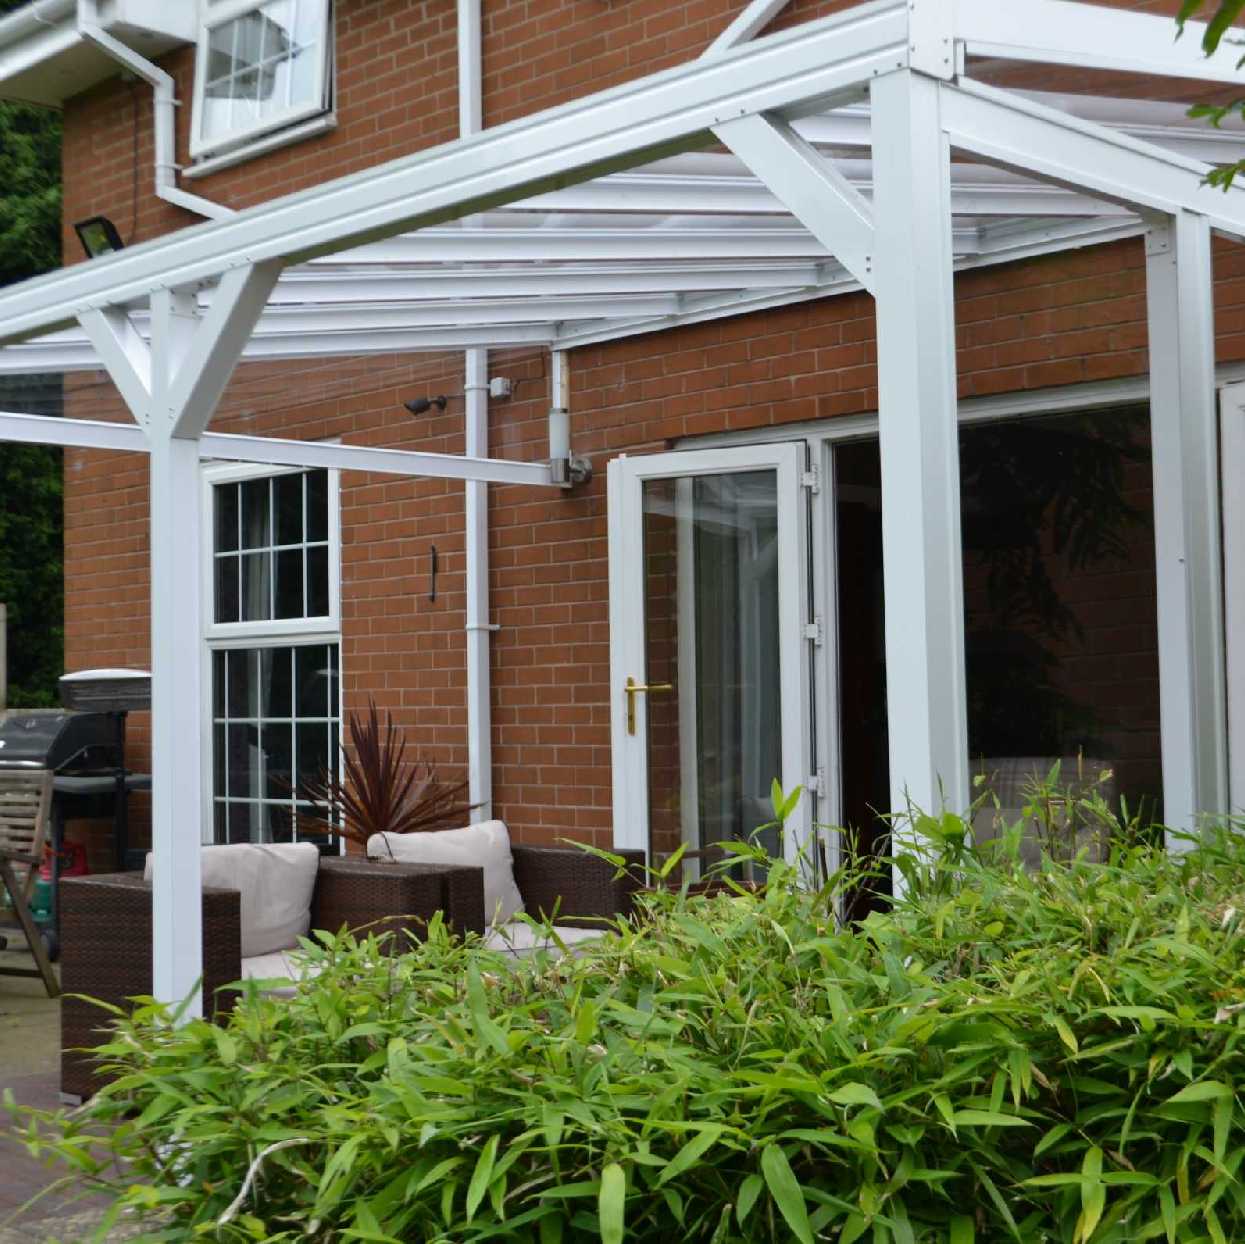 Omega Smart Lean-To Canopy, White with 6mm Glass Clear Plate Polycarbonate Glazing - 3.5m (W) x 2.0m (P), (3) Supporting Posts from Omega Build